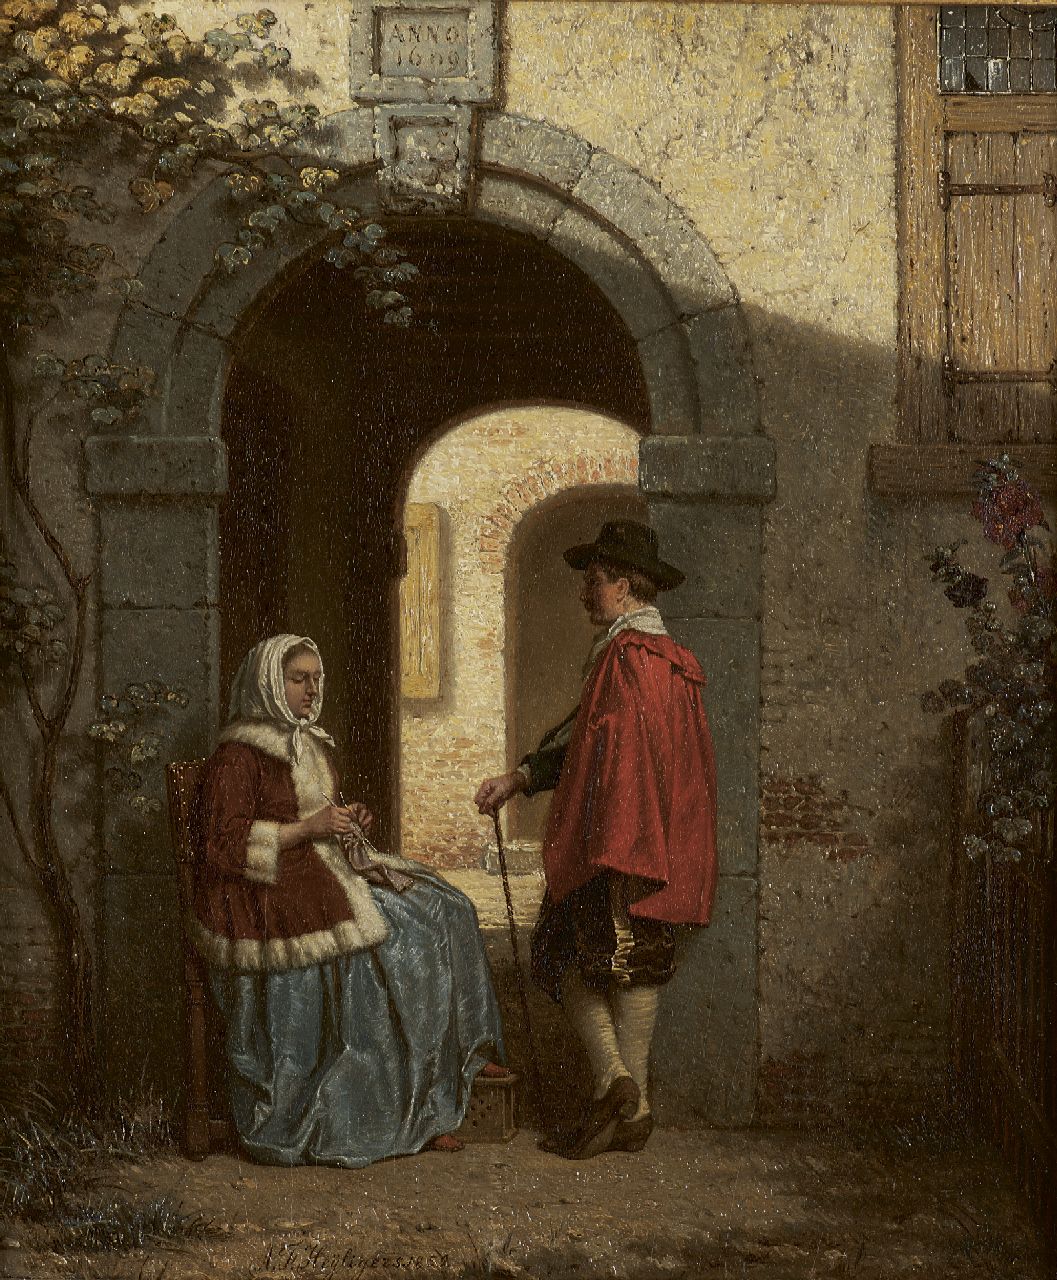 Heijligers A.F.  | Antoon François Heijligers, The conversation, oil on panel 22.2 x 18.7 cm, signed l.c. and dated 1859